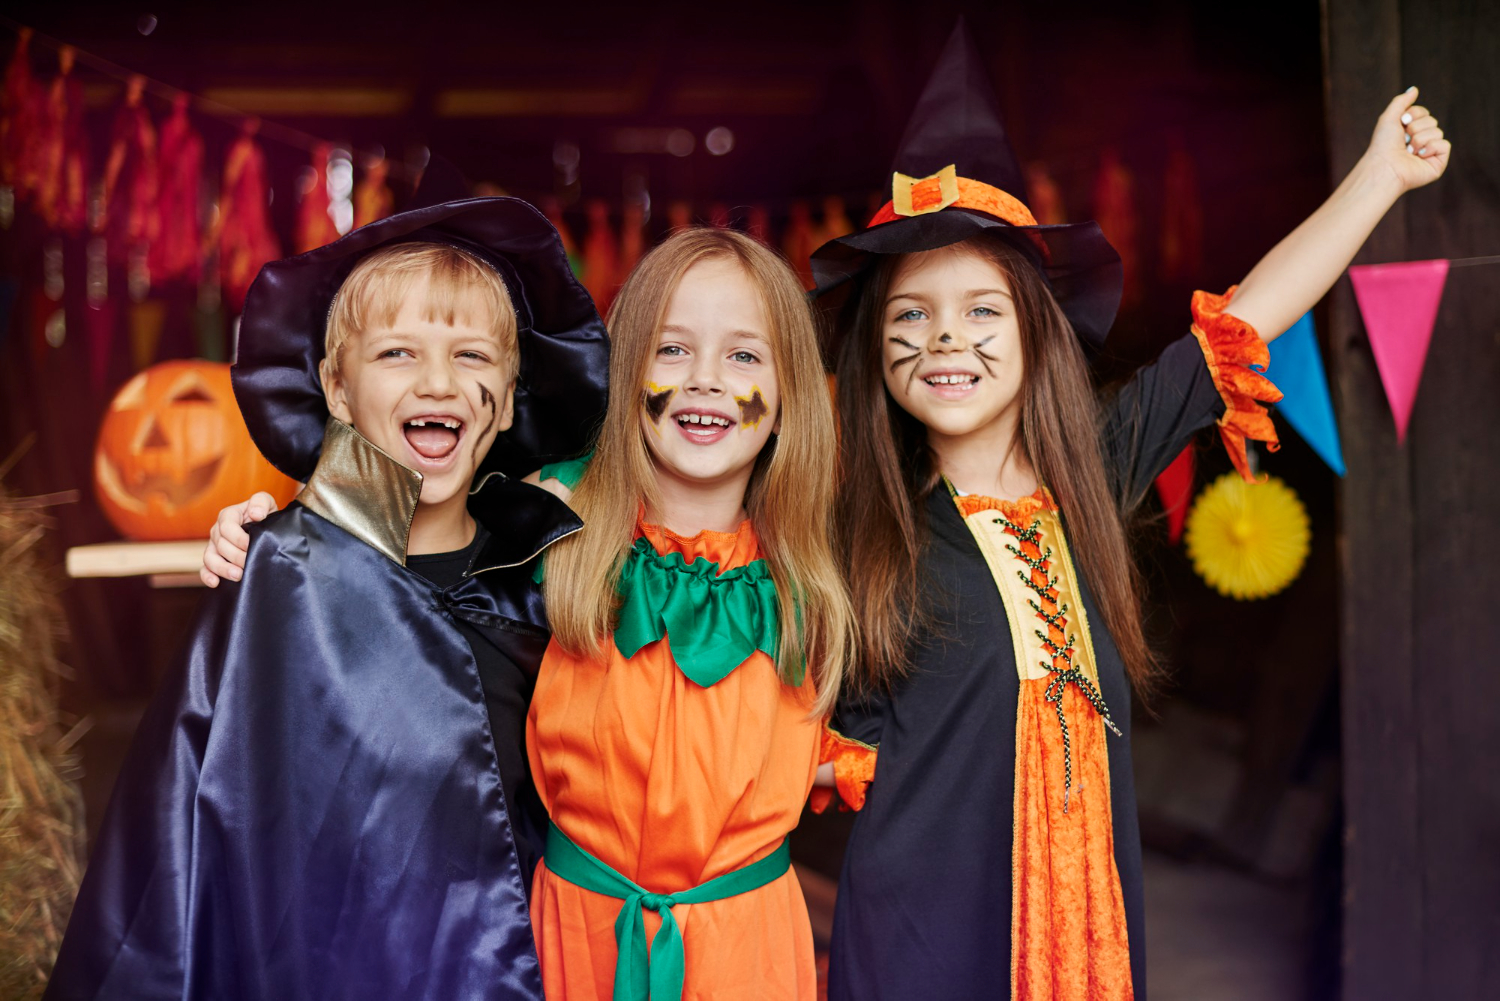 Party Supplies for Halloween: one of the biggest opportunities of the autumn season